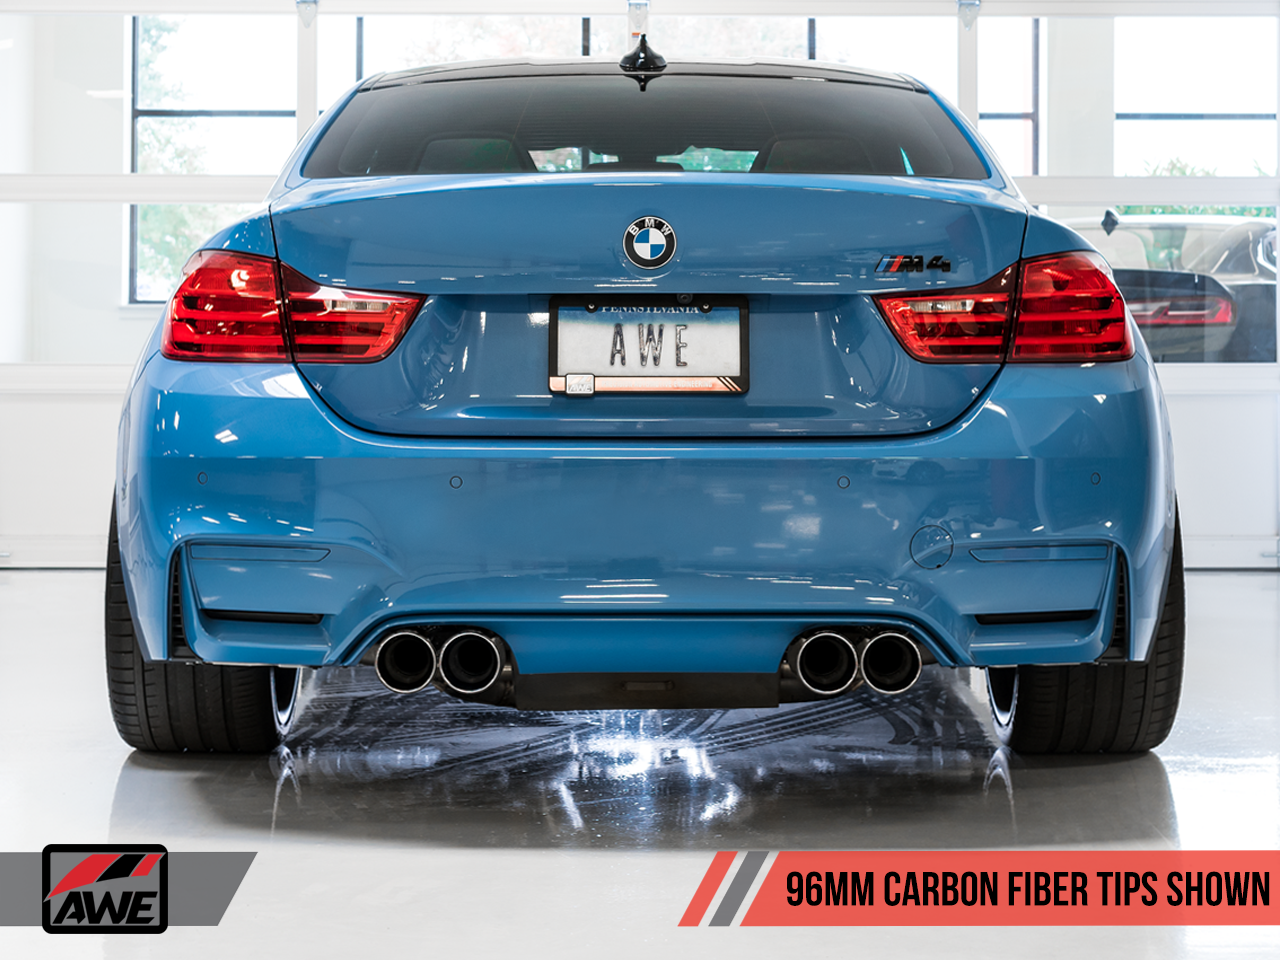 AWE SwitchPath™ Exhaust for BMW F8X M3/M4 - Non-Resonated - Carbon Fiber Tips